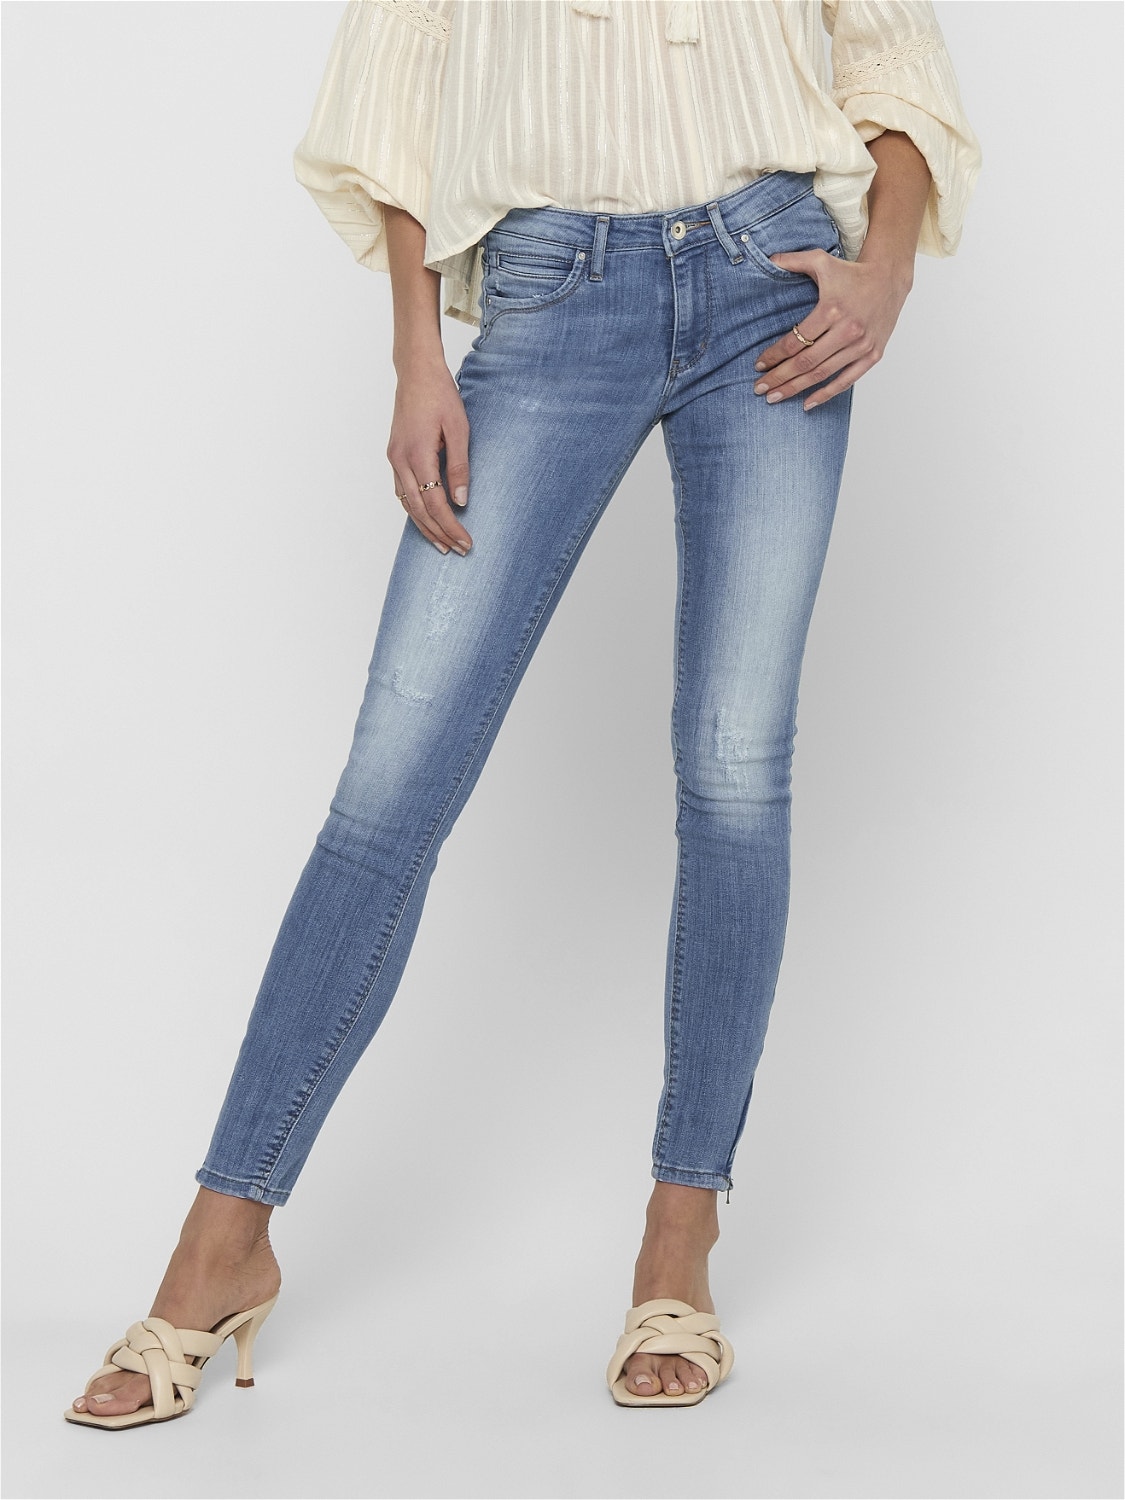 Kendell ankle zip Skinny fit jeans | Light | ONLY®